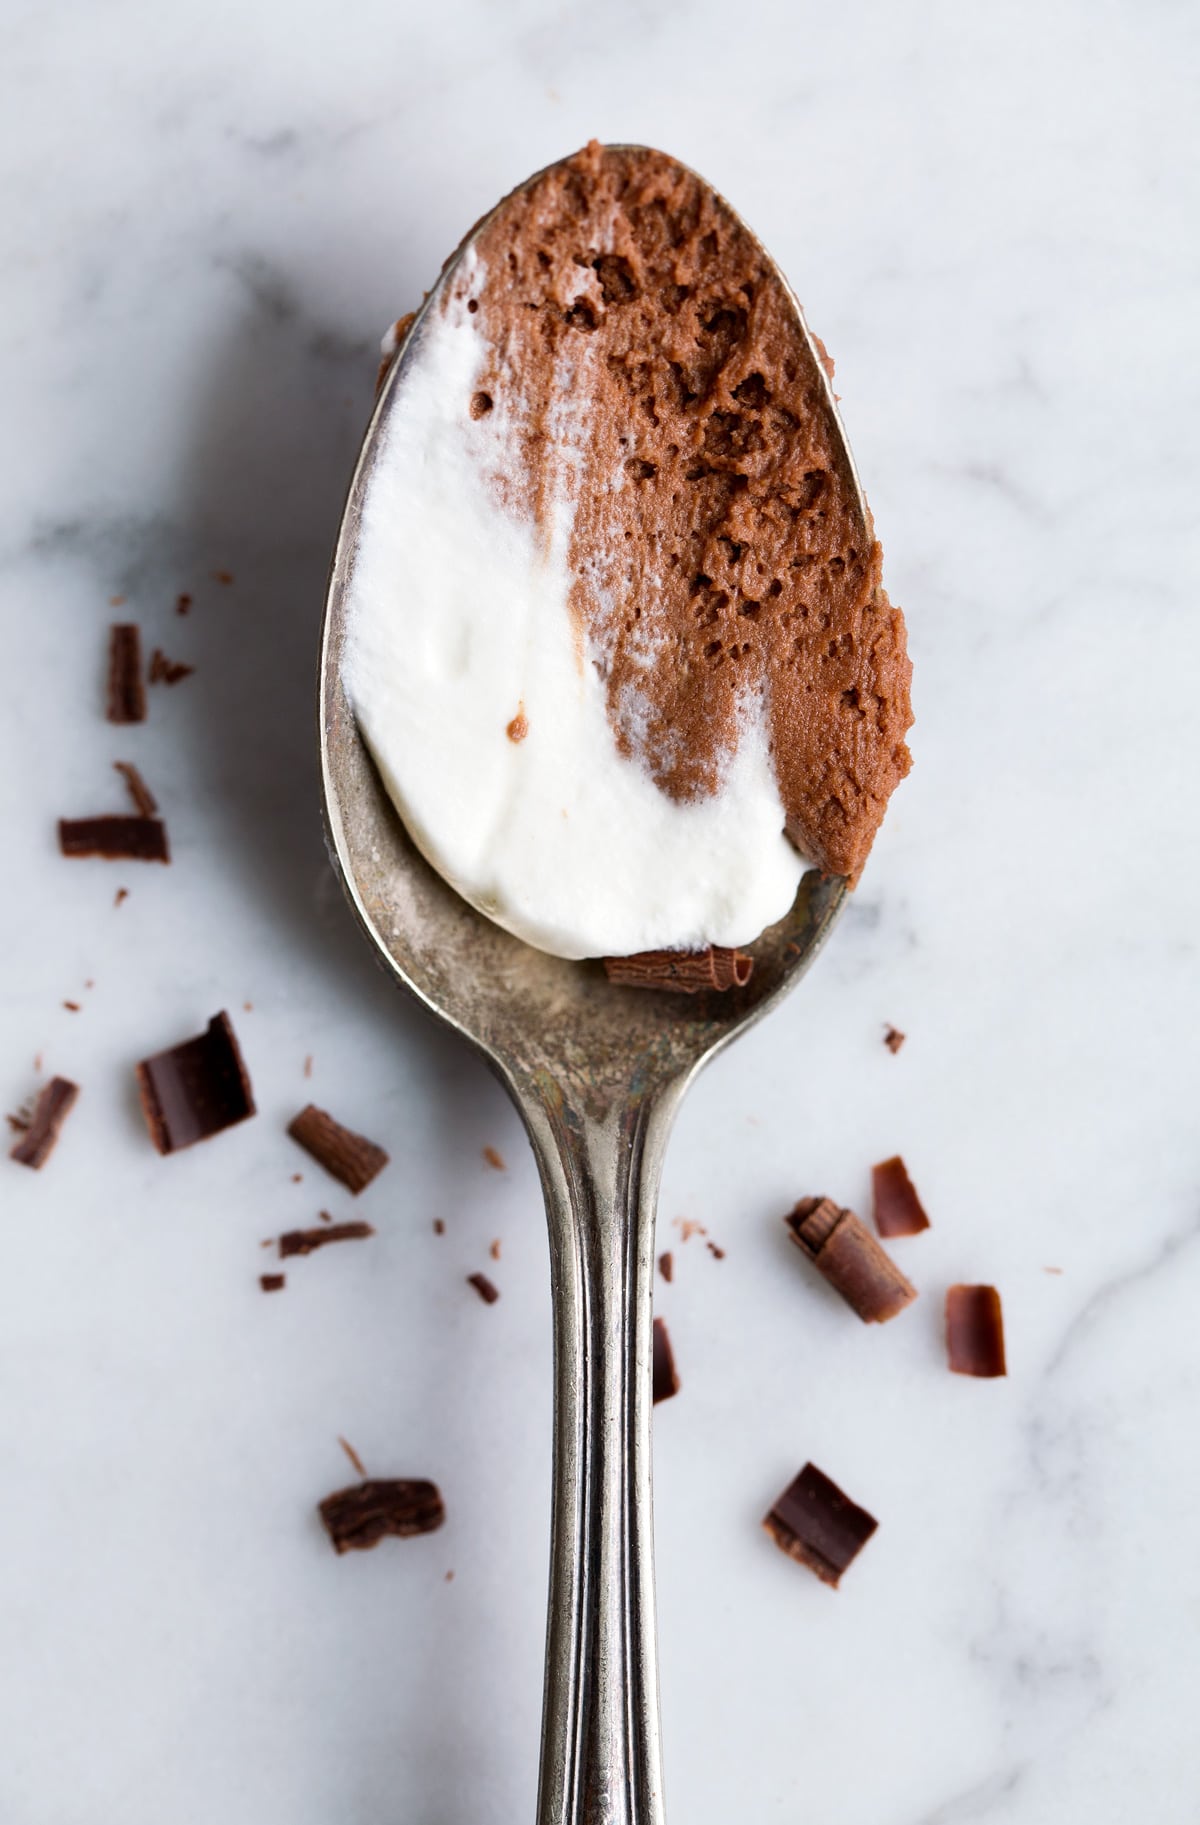 Spoonful of chocolate mousse